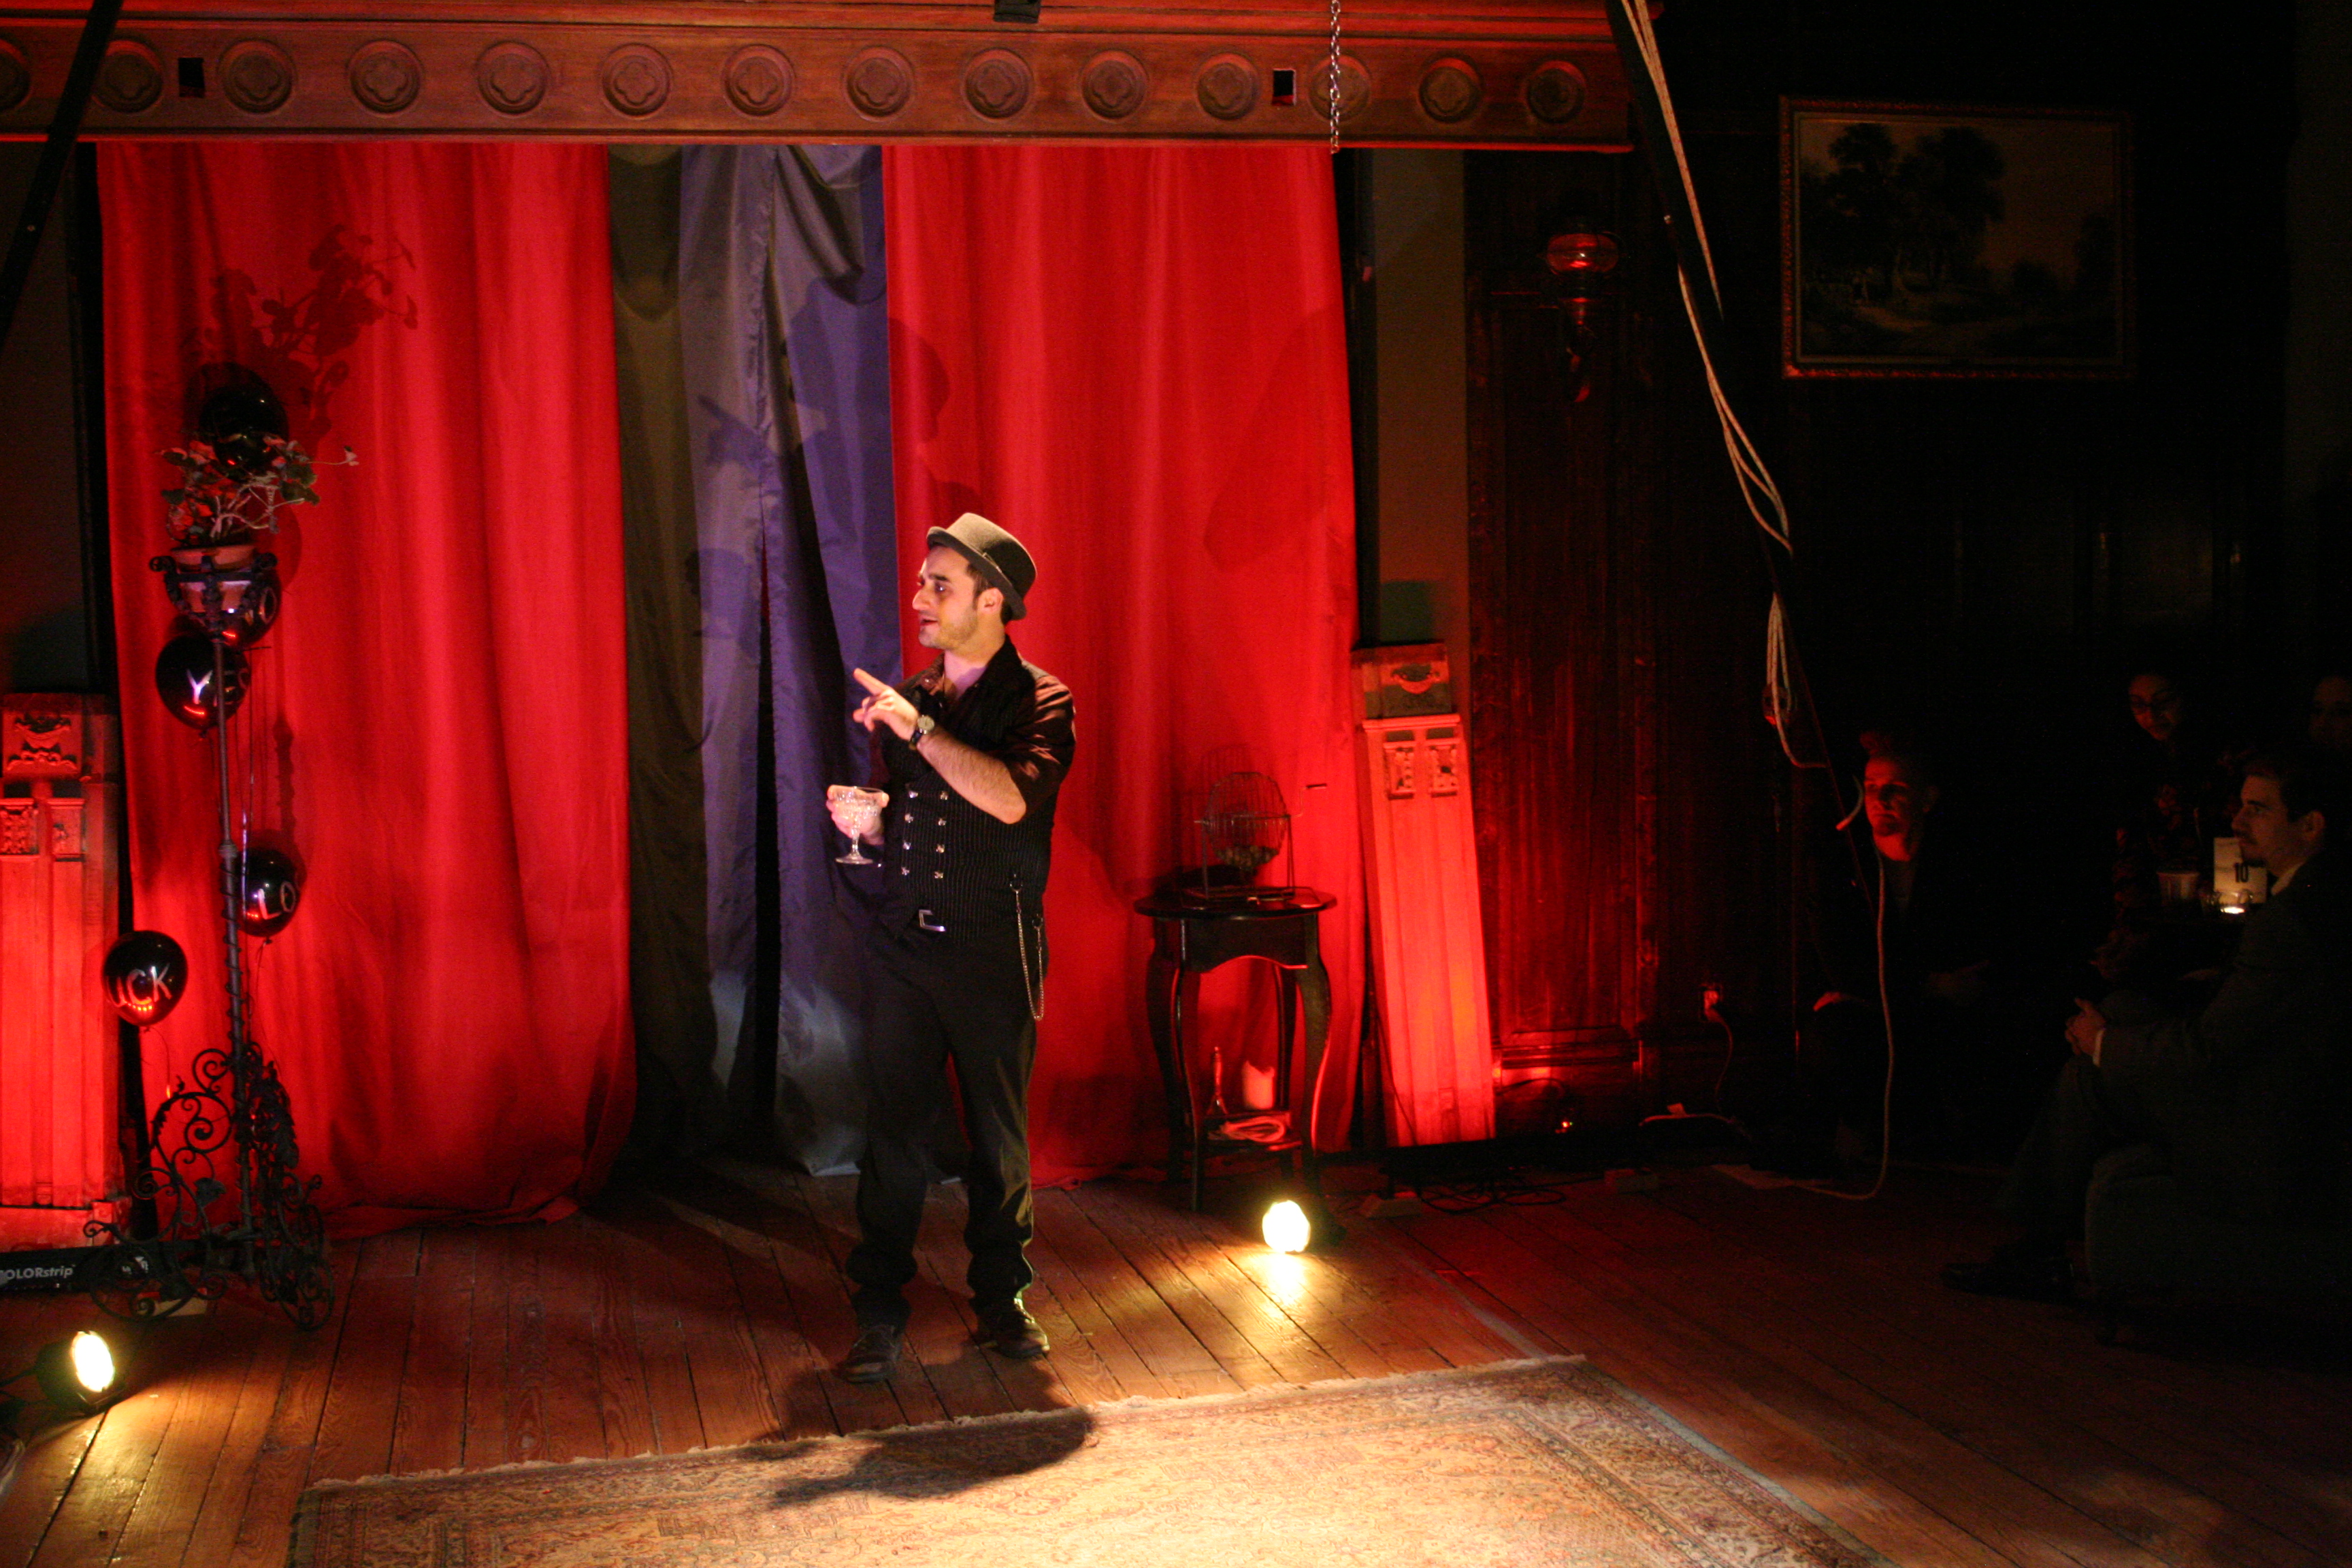 Magician stands center stage in front of red curtains.